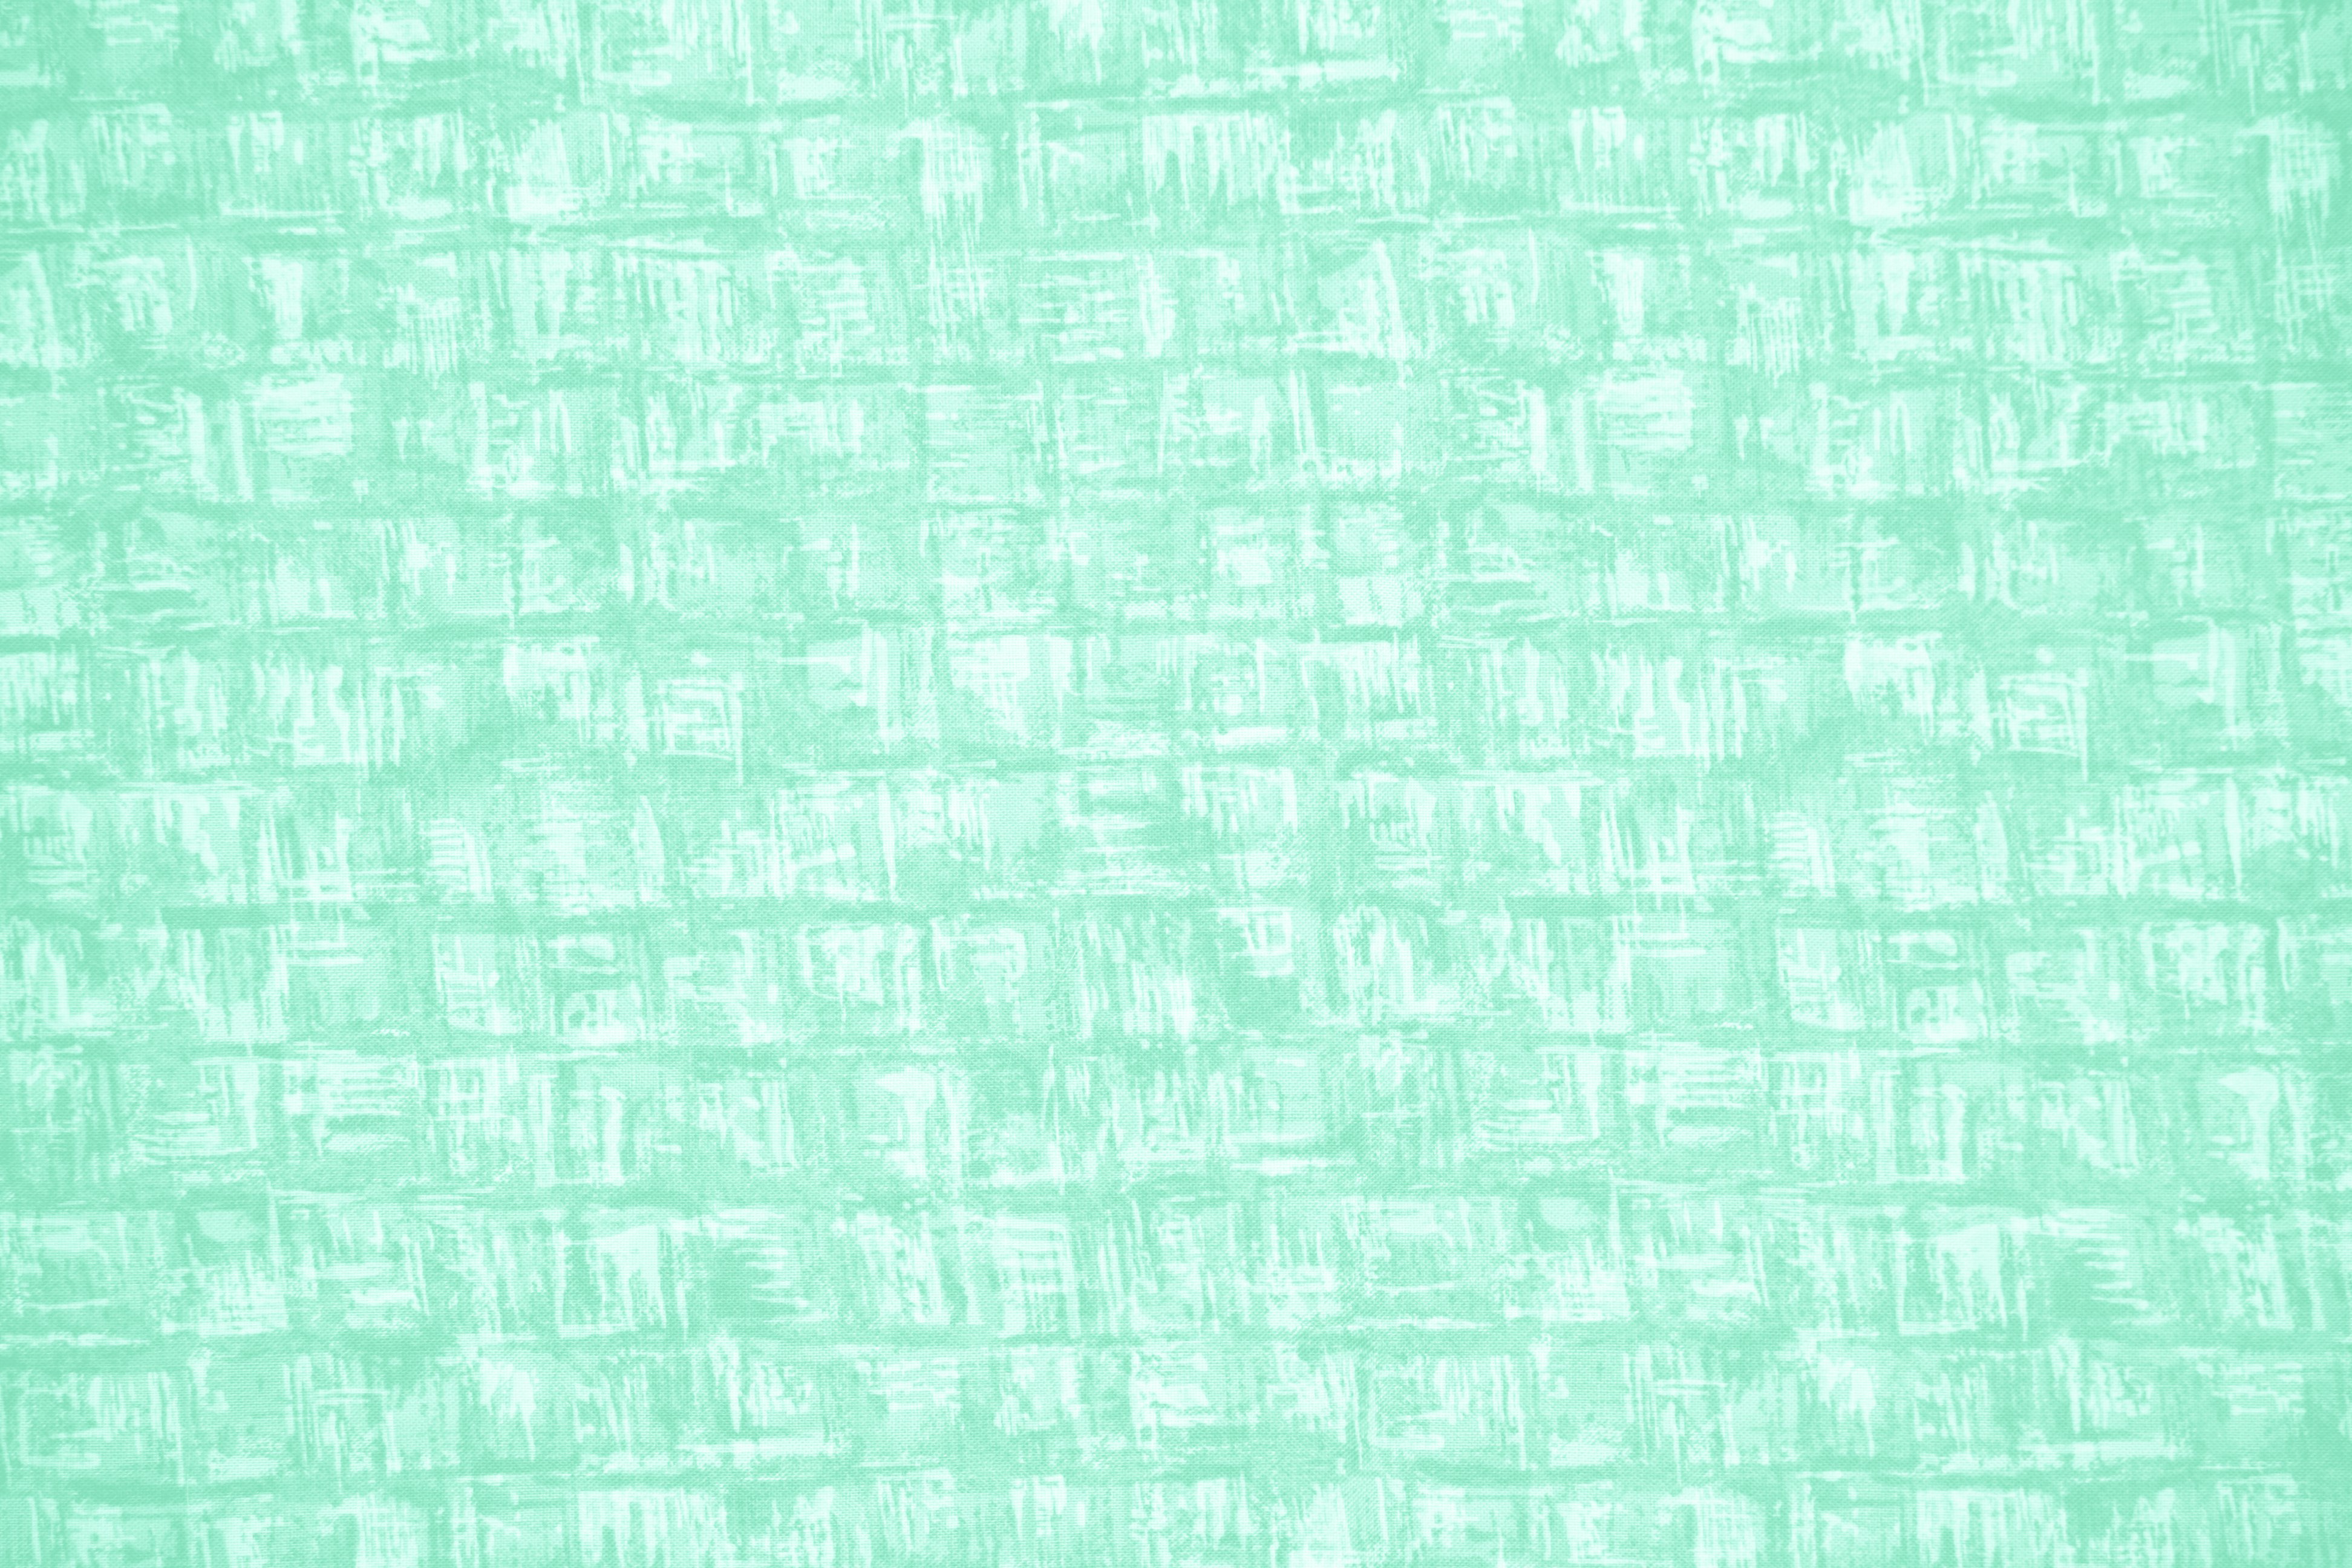 Mint Green Abstract Squares Fabric Texture Picture 3888x2592